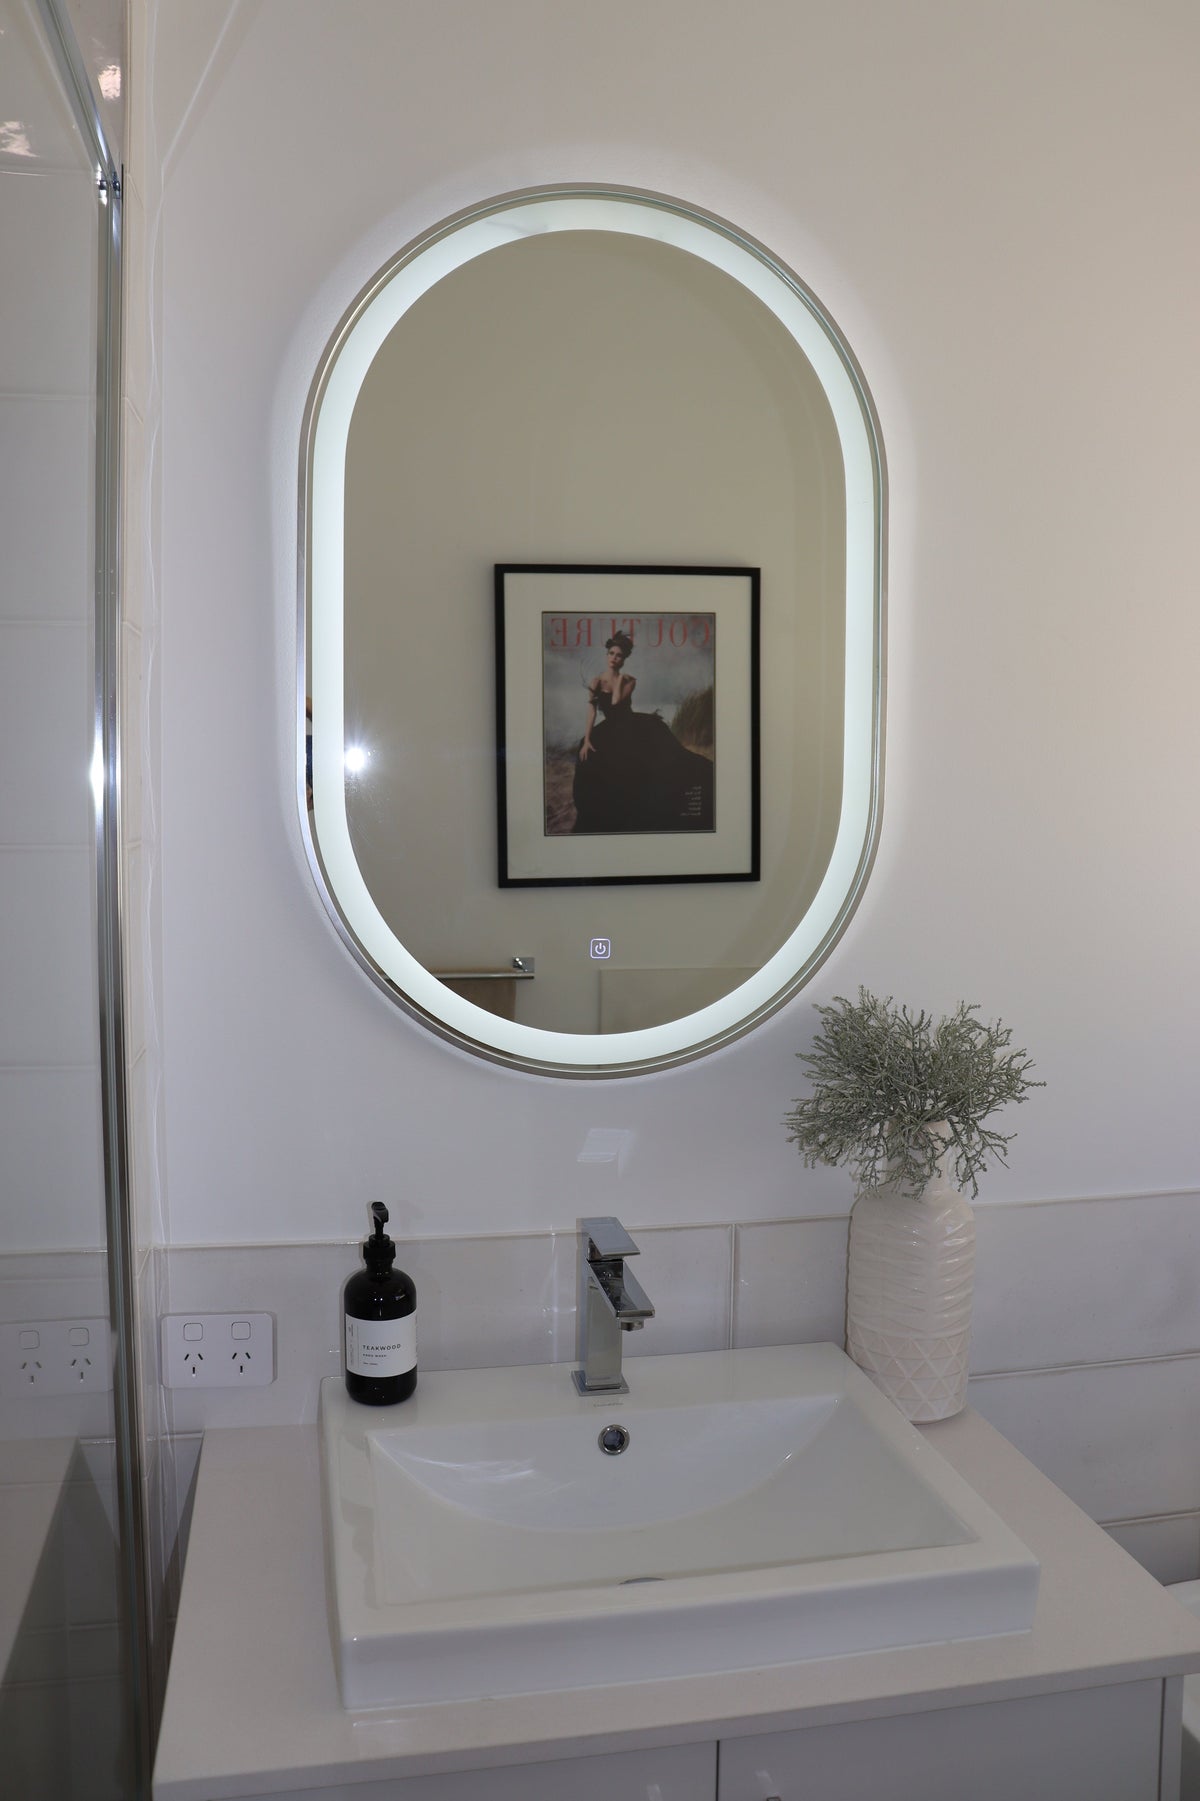  Oval LED Mirror and Spotless White Square Sink in White Bathroom